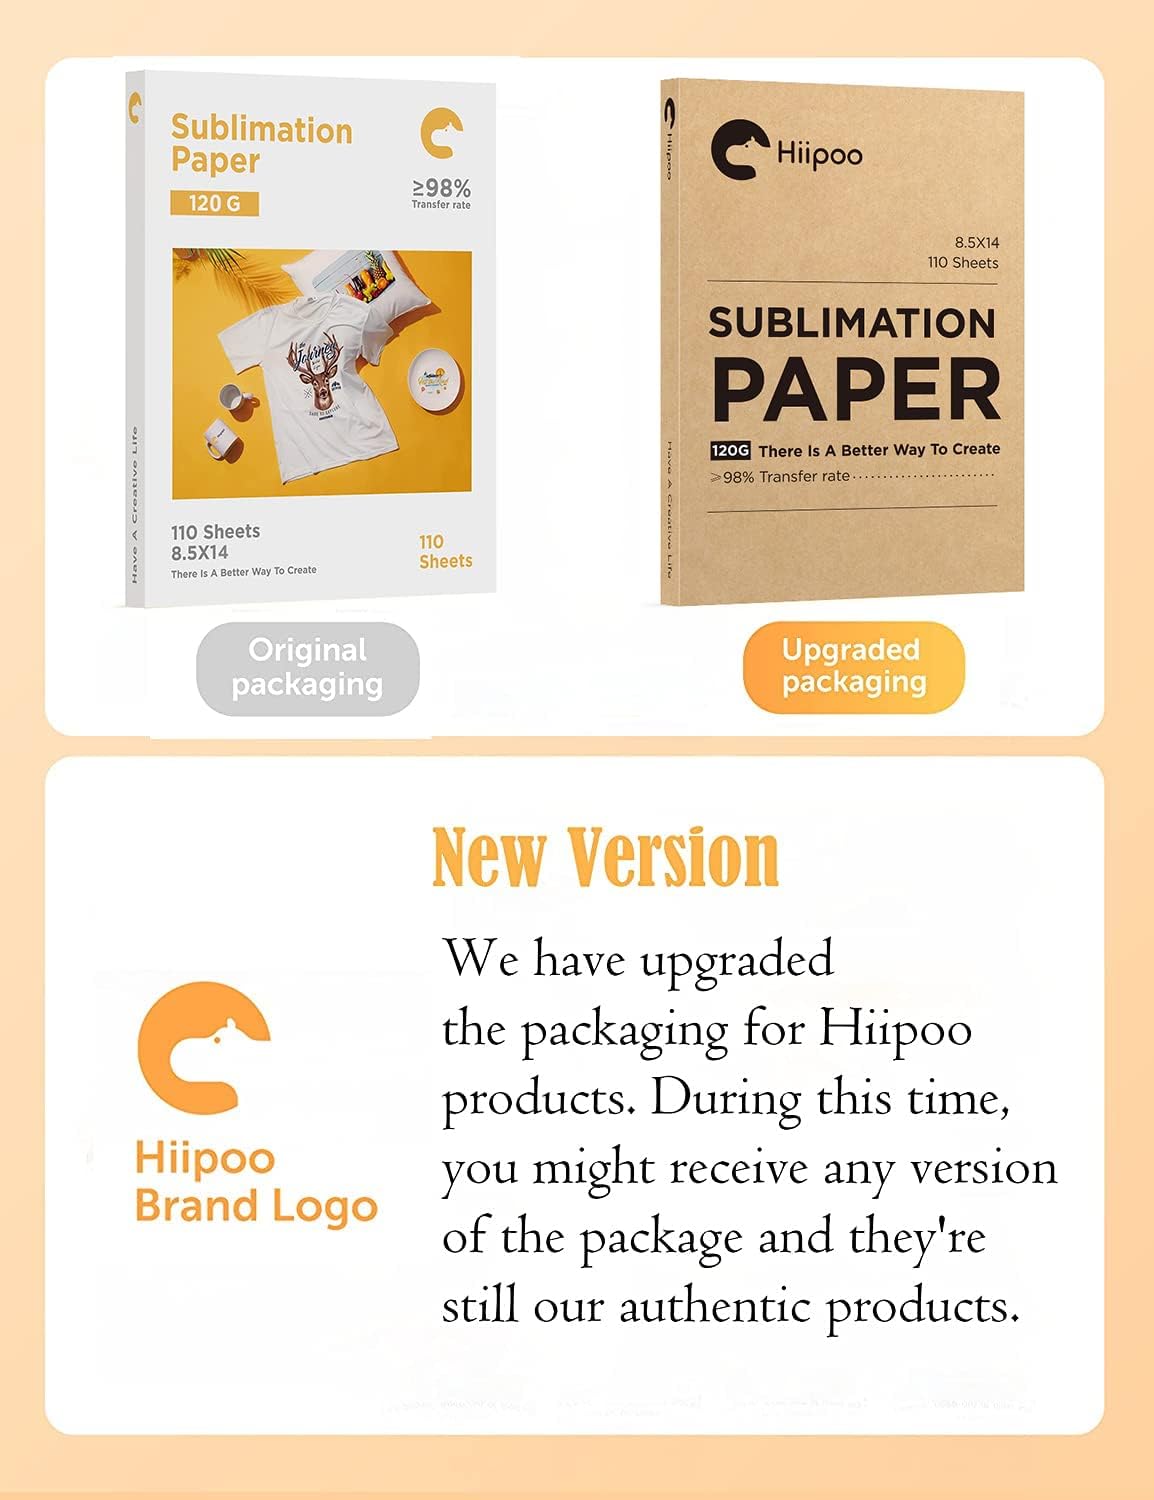 Hiipoo Sublimation Paper 8.5x14 Inch 110 Sheets for Any Inkjet Printer which Match Sublimation Ink 120gsm,Over 98% High Transfer Rate,DIY Print Tools